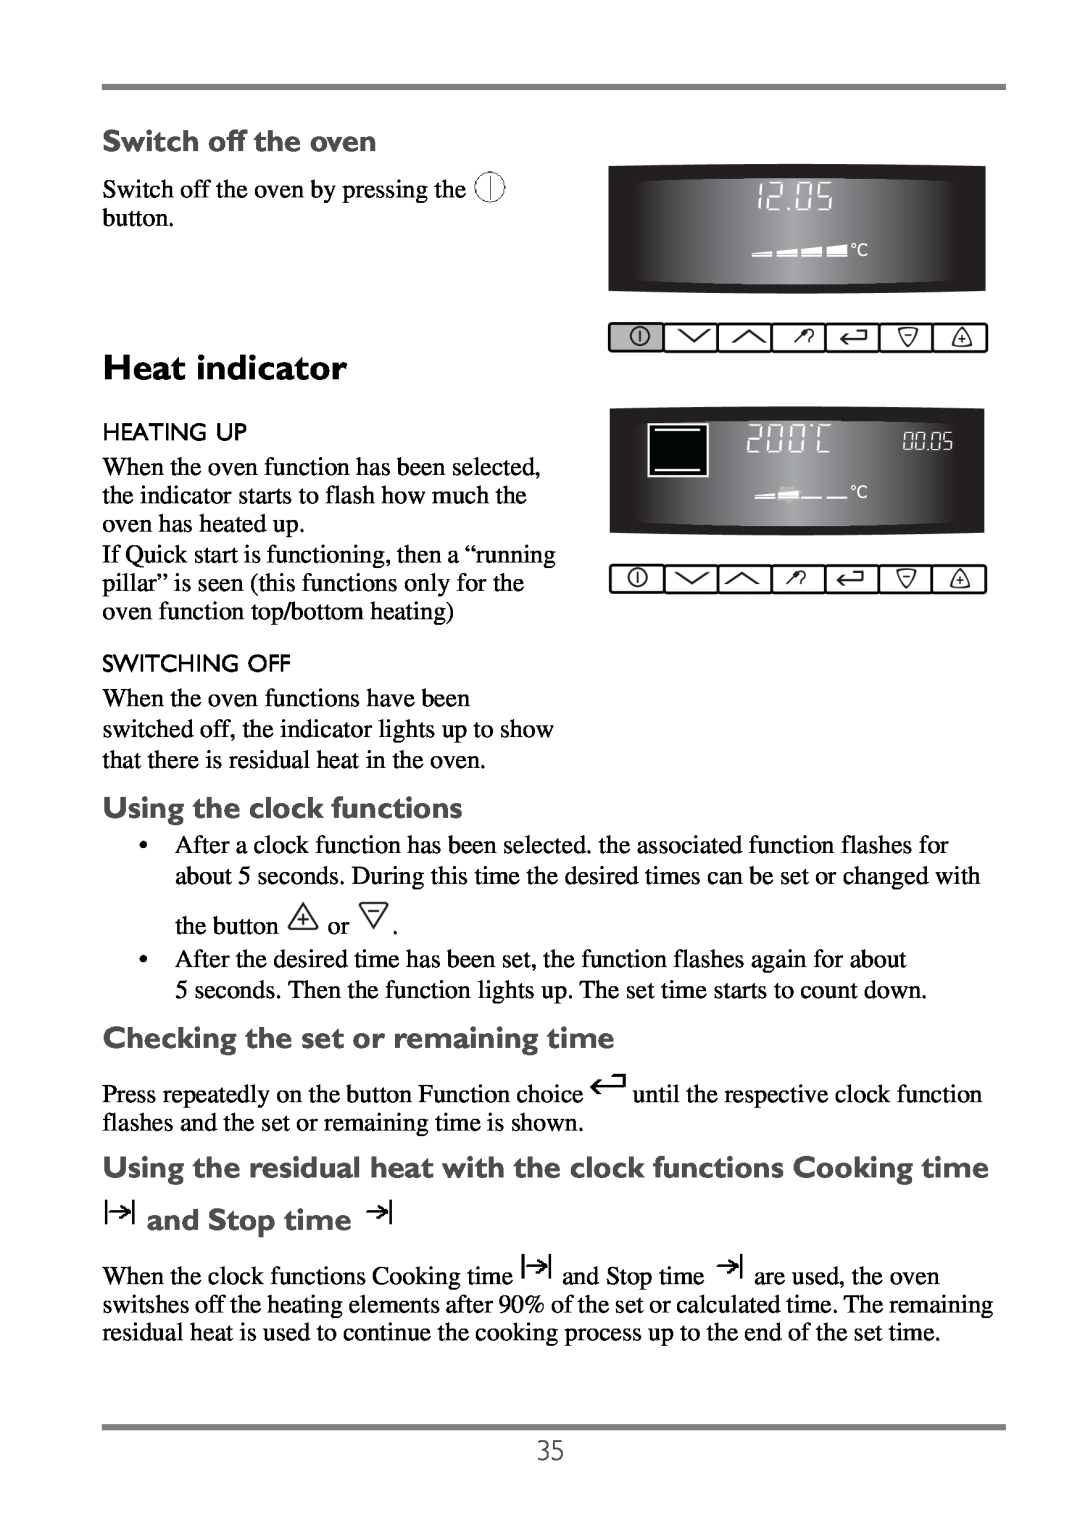 Electrolux EKC60752 Heat indicator, Switch off the oven, Using the clock functions, Checking the set or remaining time 